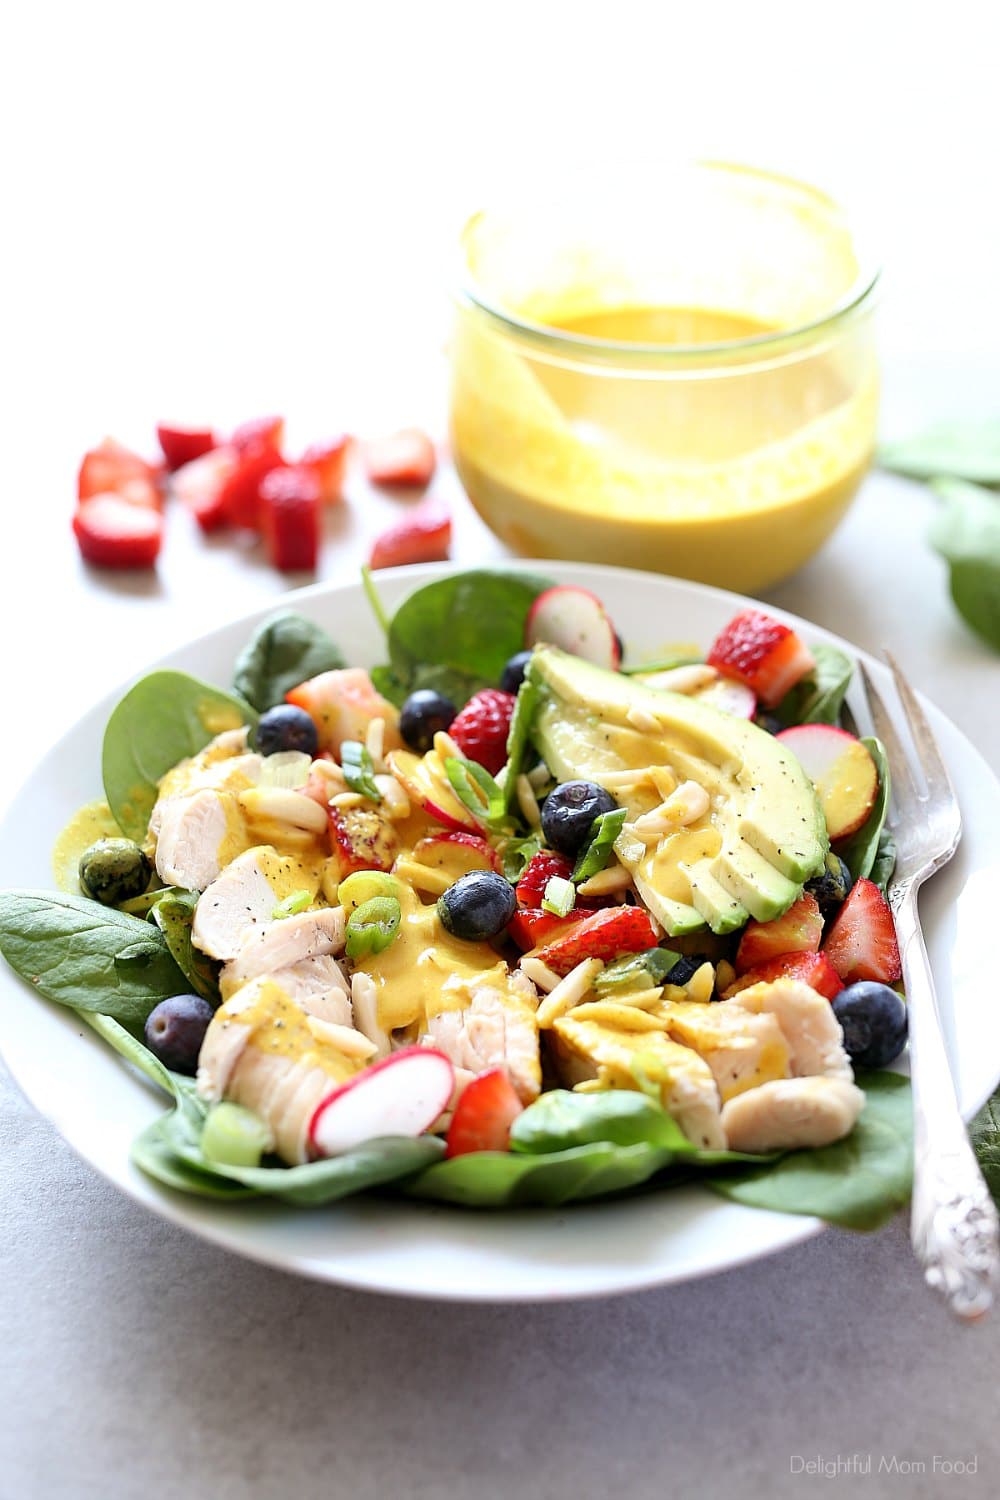 Super charge your day with this easy grilled chicken spinach salad topped with strawberries, blueberries, almonds, avocado and an anti-inflammatory turmeric almond salad dressing! #salad #spinachsaladrecipe #spinach #strawberries #blueberries #almonds #healthy #grilledchicken #maindish #healthy #dressing #turmeric | Recipe at delightfulmomfood.com